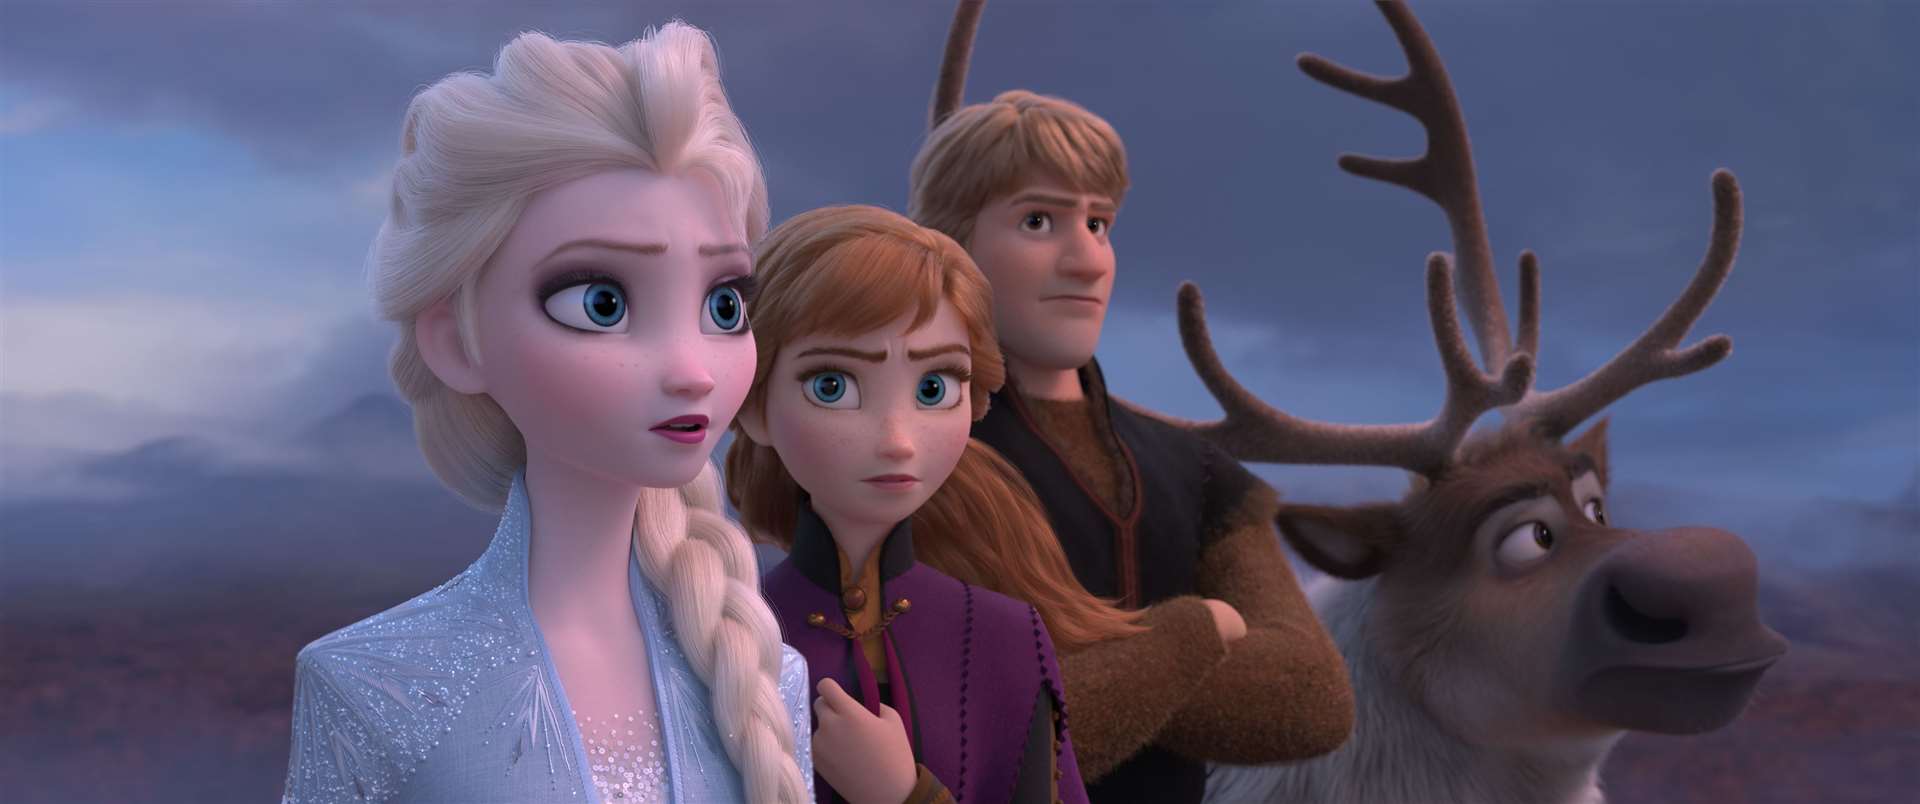 Elsa (voiced by Idina Menzel), Anna (Kristen Bell), Kristoff (Jonathan Groff) and Sven the reindeer. Picture credit: PA Photo/Disney. All Rights Reserved.